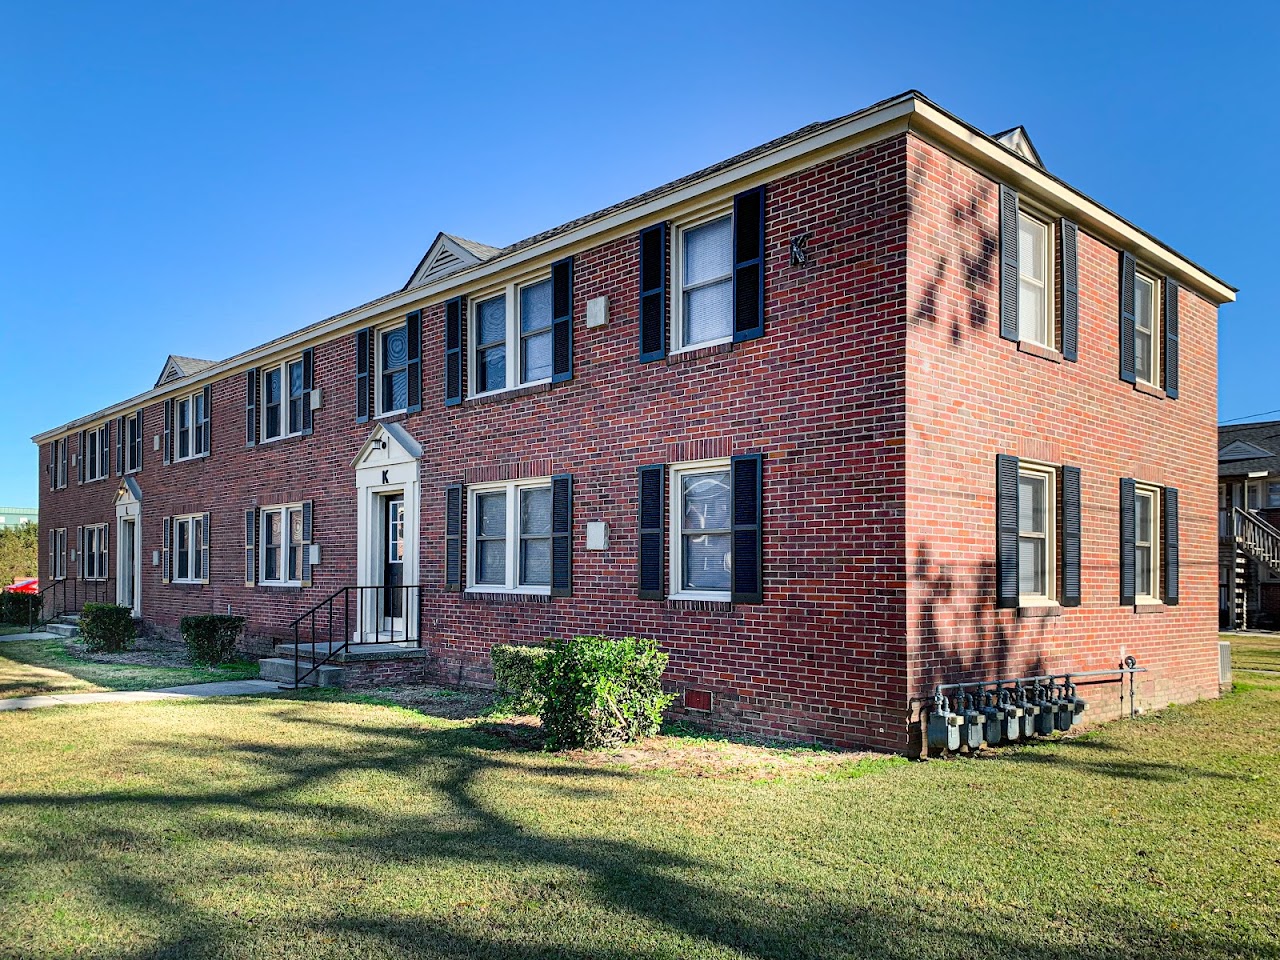 Photo of ASHLEY PARK APARTMENTS. Affordable housing located at 4000 ASHLEY PARK DRIVE NEW BERN, NC 28562